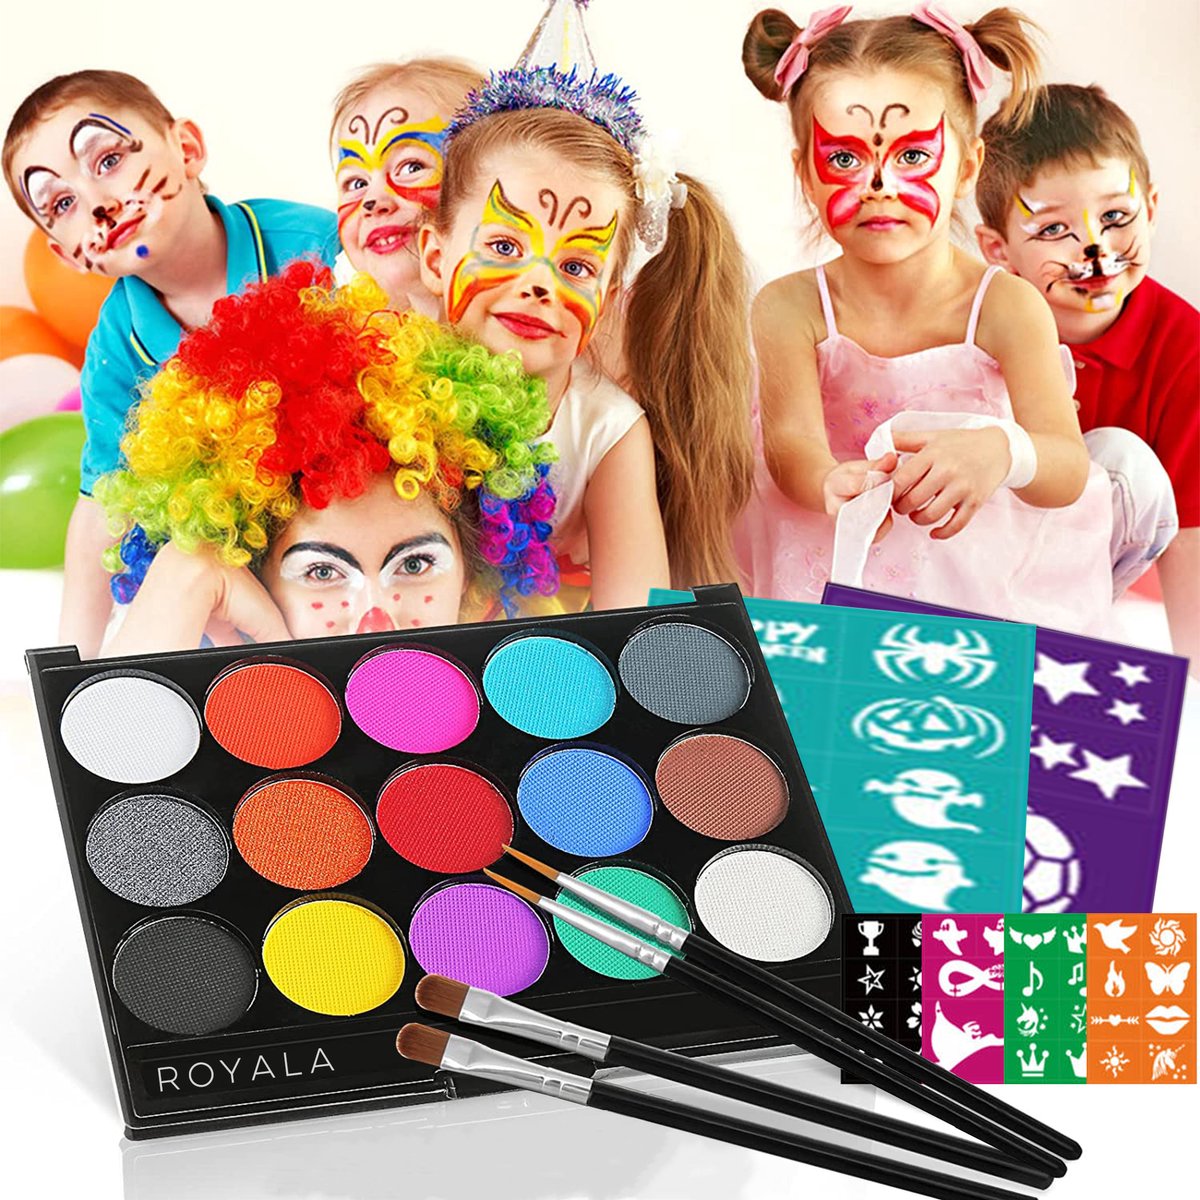 Palette maquillage Carnaval - 9 couleurs - Maquillage - 10 Doigts